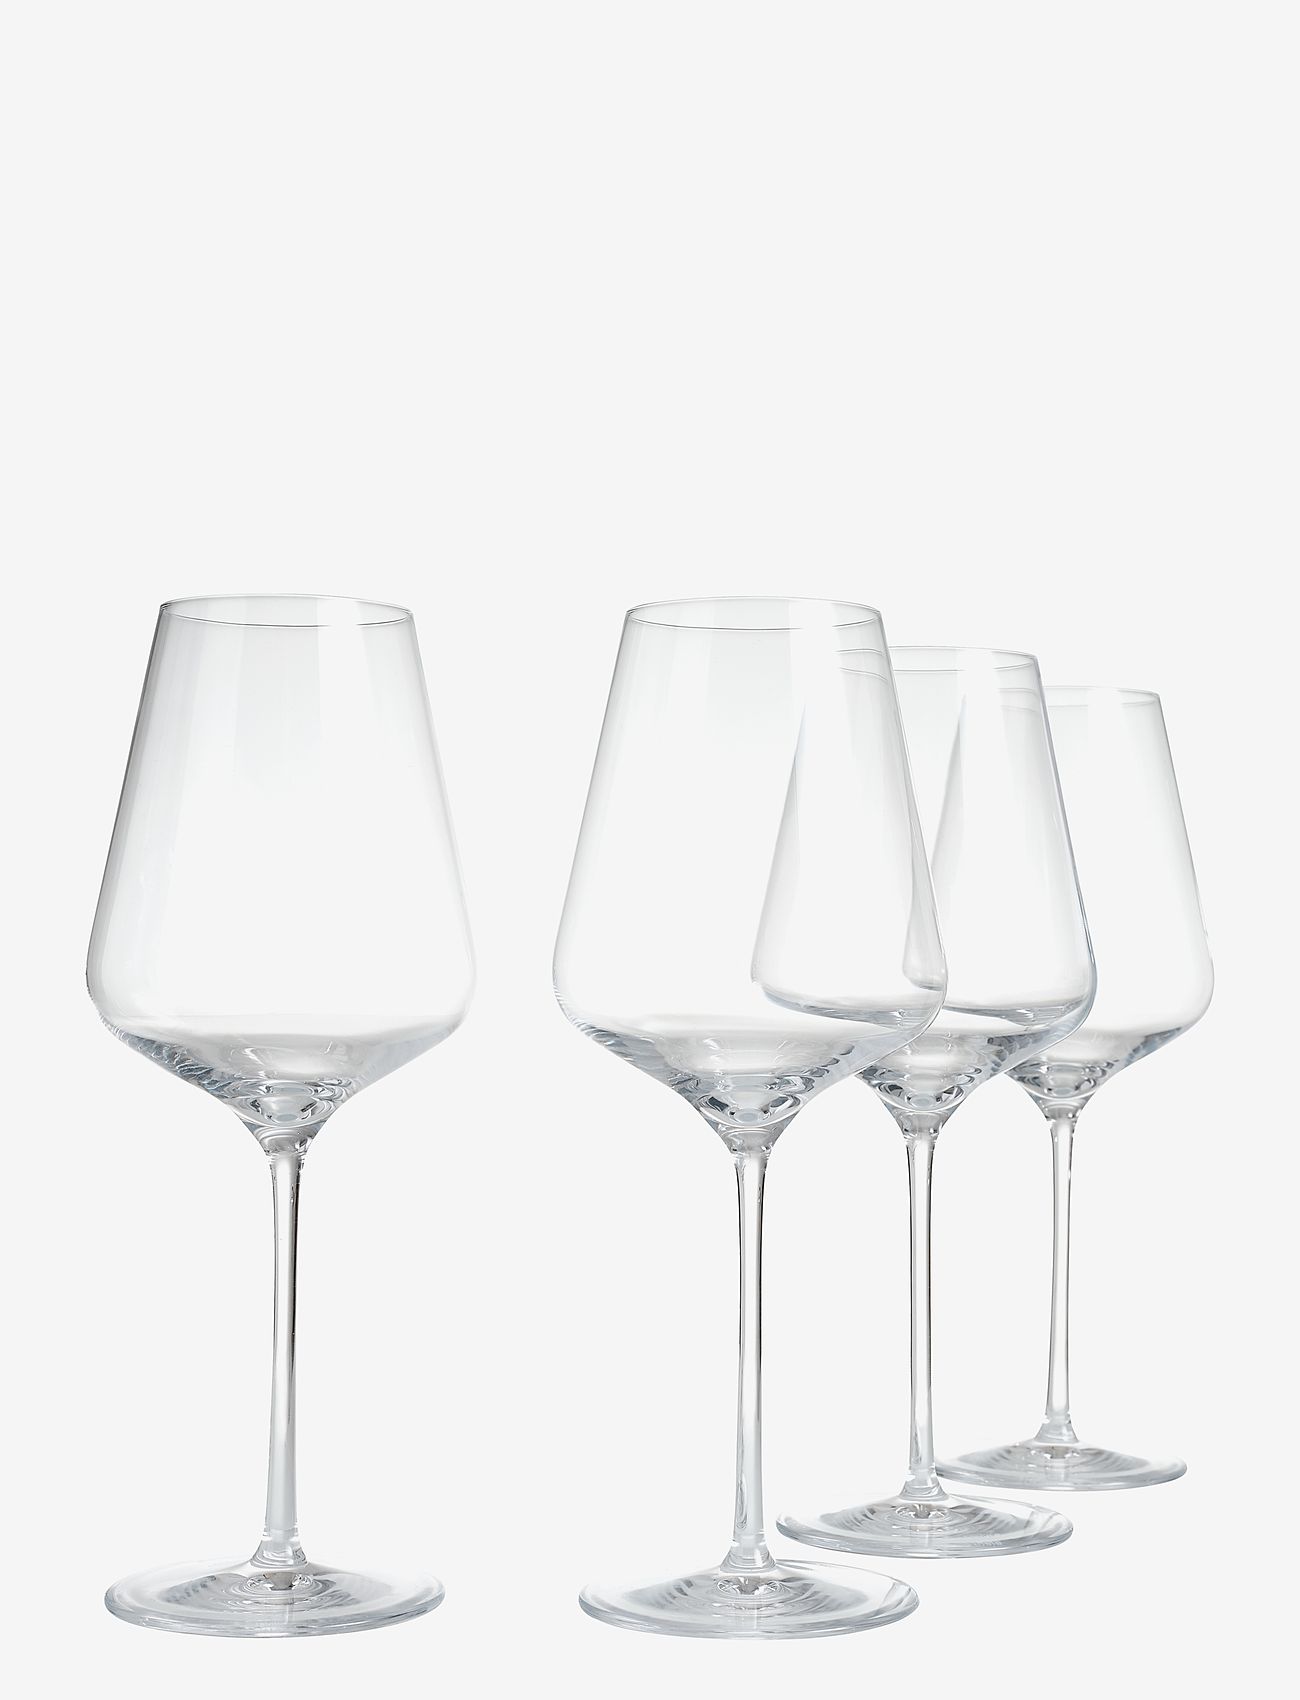 Aida - connoisseur extravagant powerful redwine 64,5 cl - red wine glasses - clear - 0